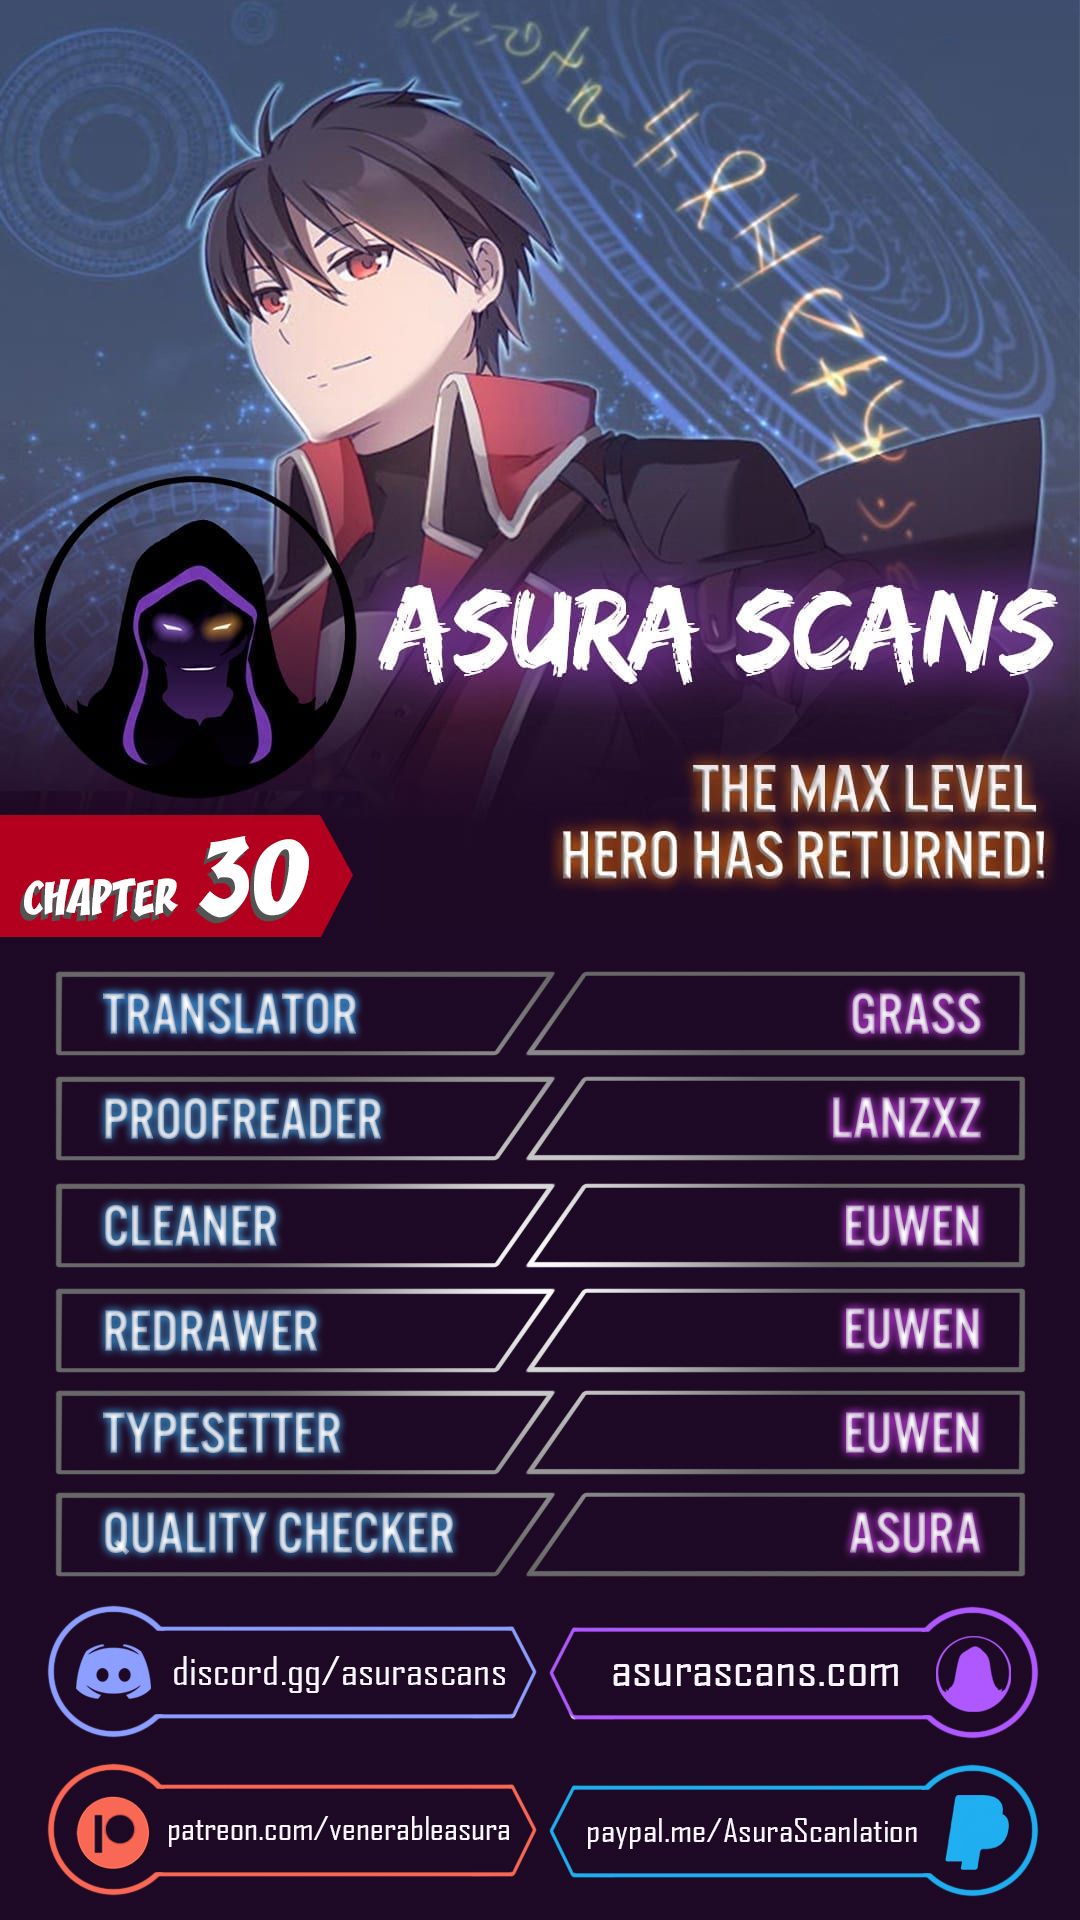 The MAX leveled hero will return! Chapter 30